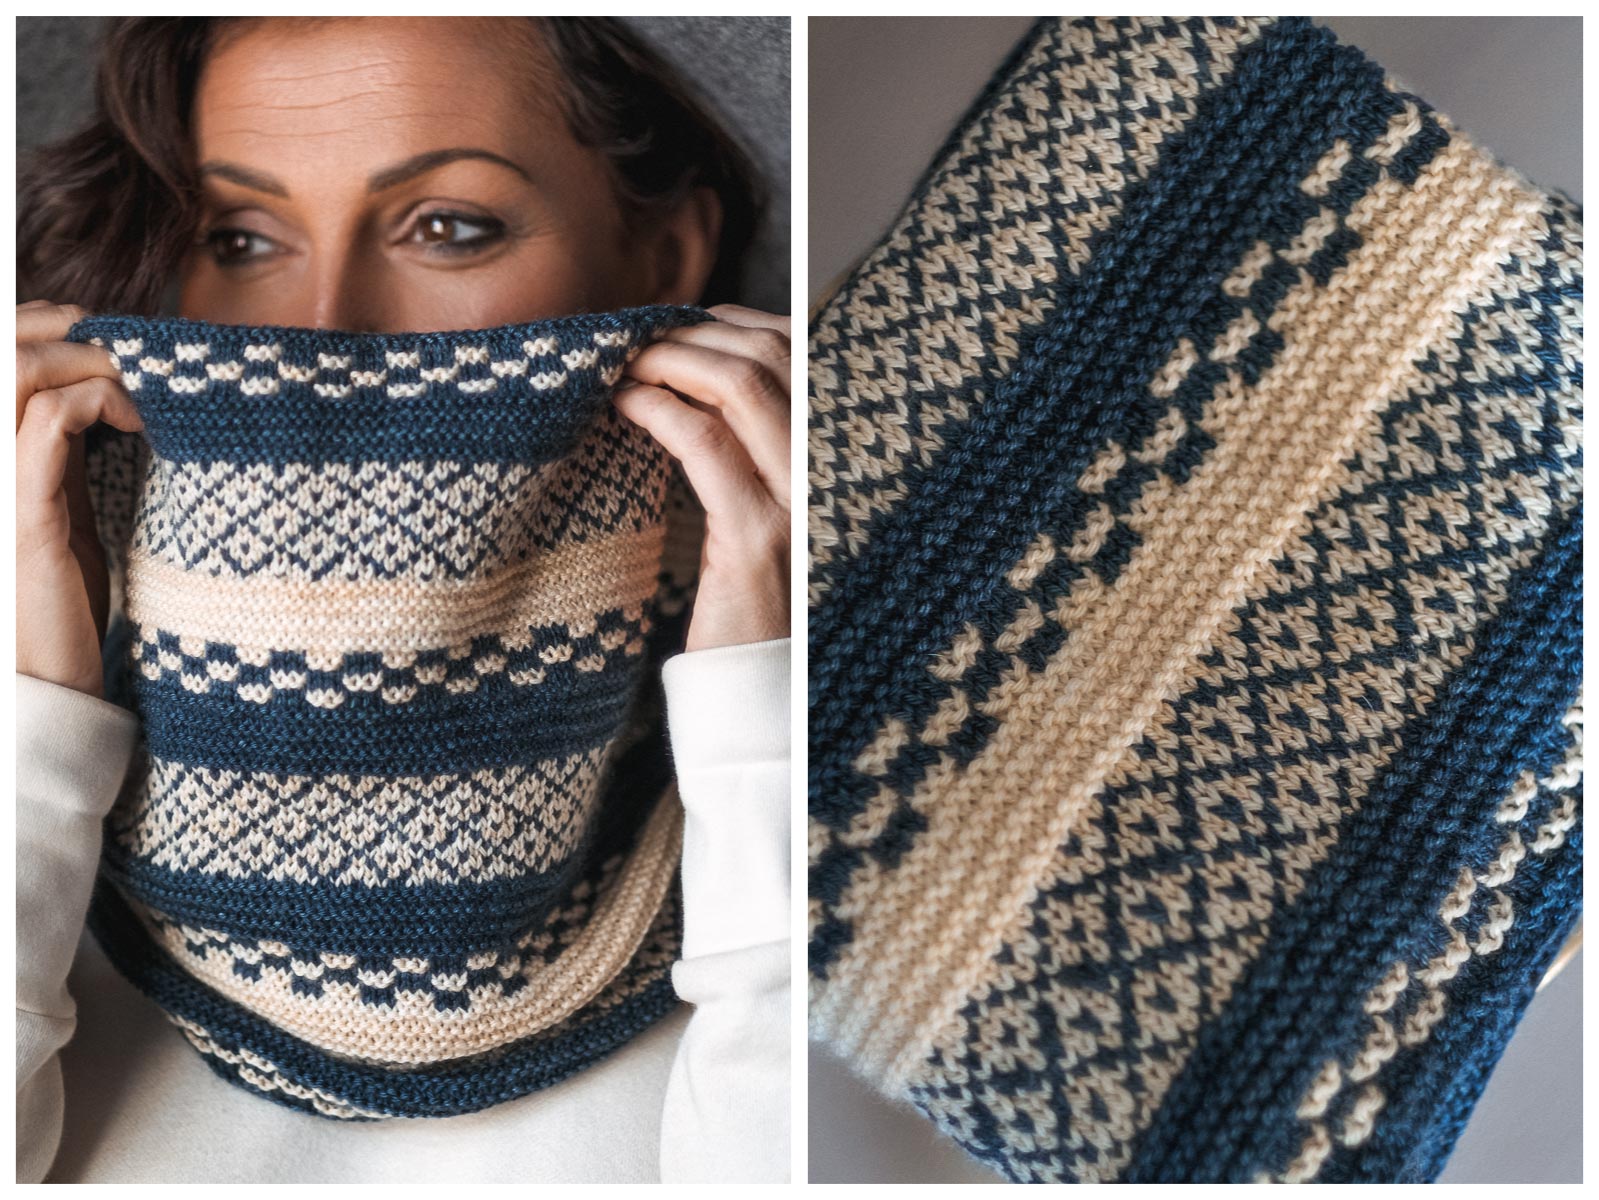 Colorwork Knitting Pattern Collection - Studio Knit